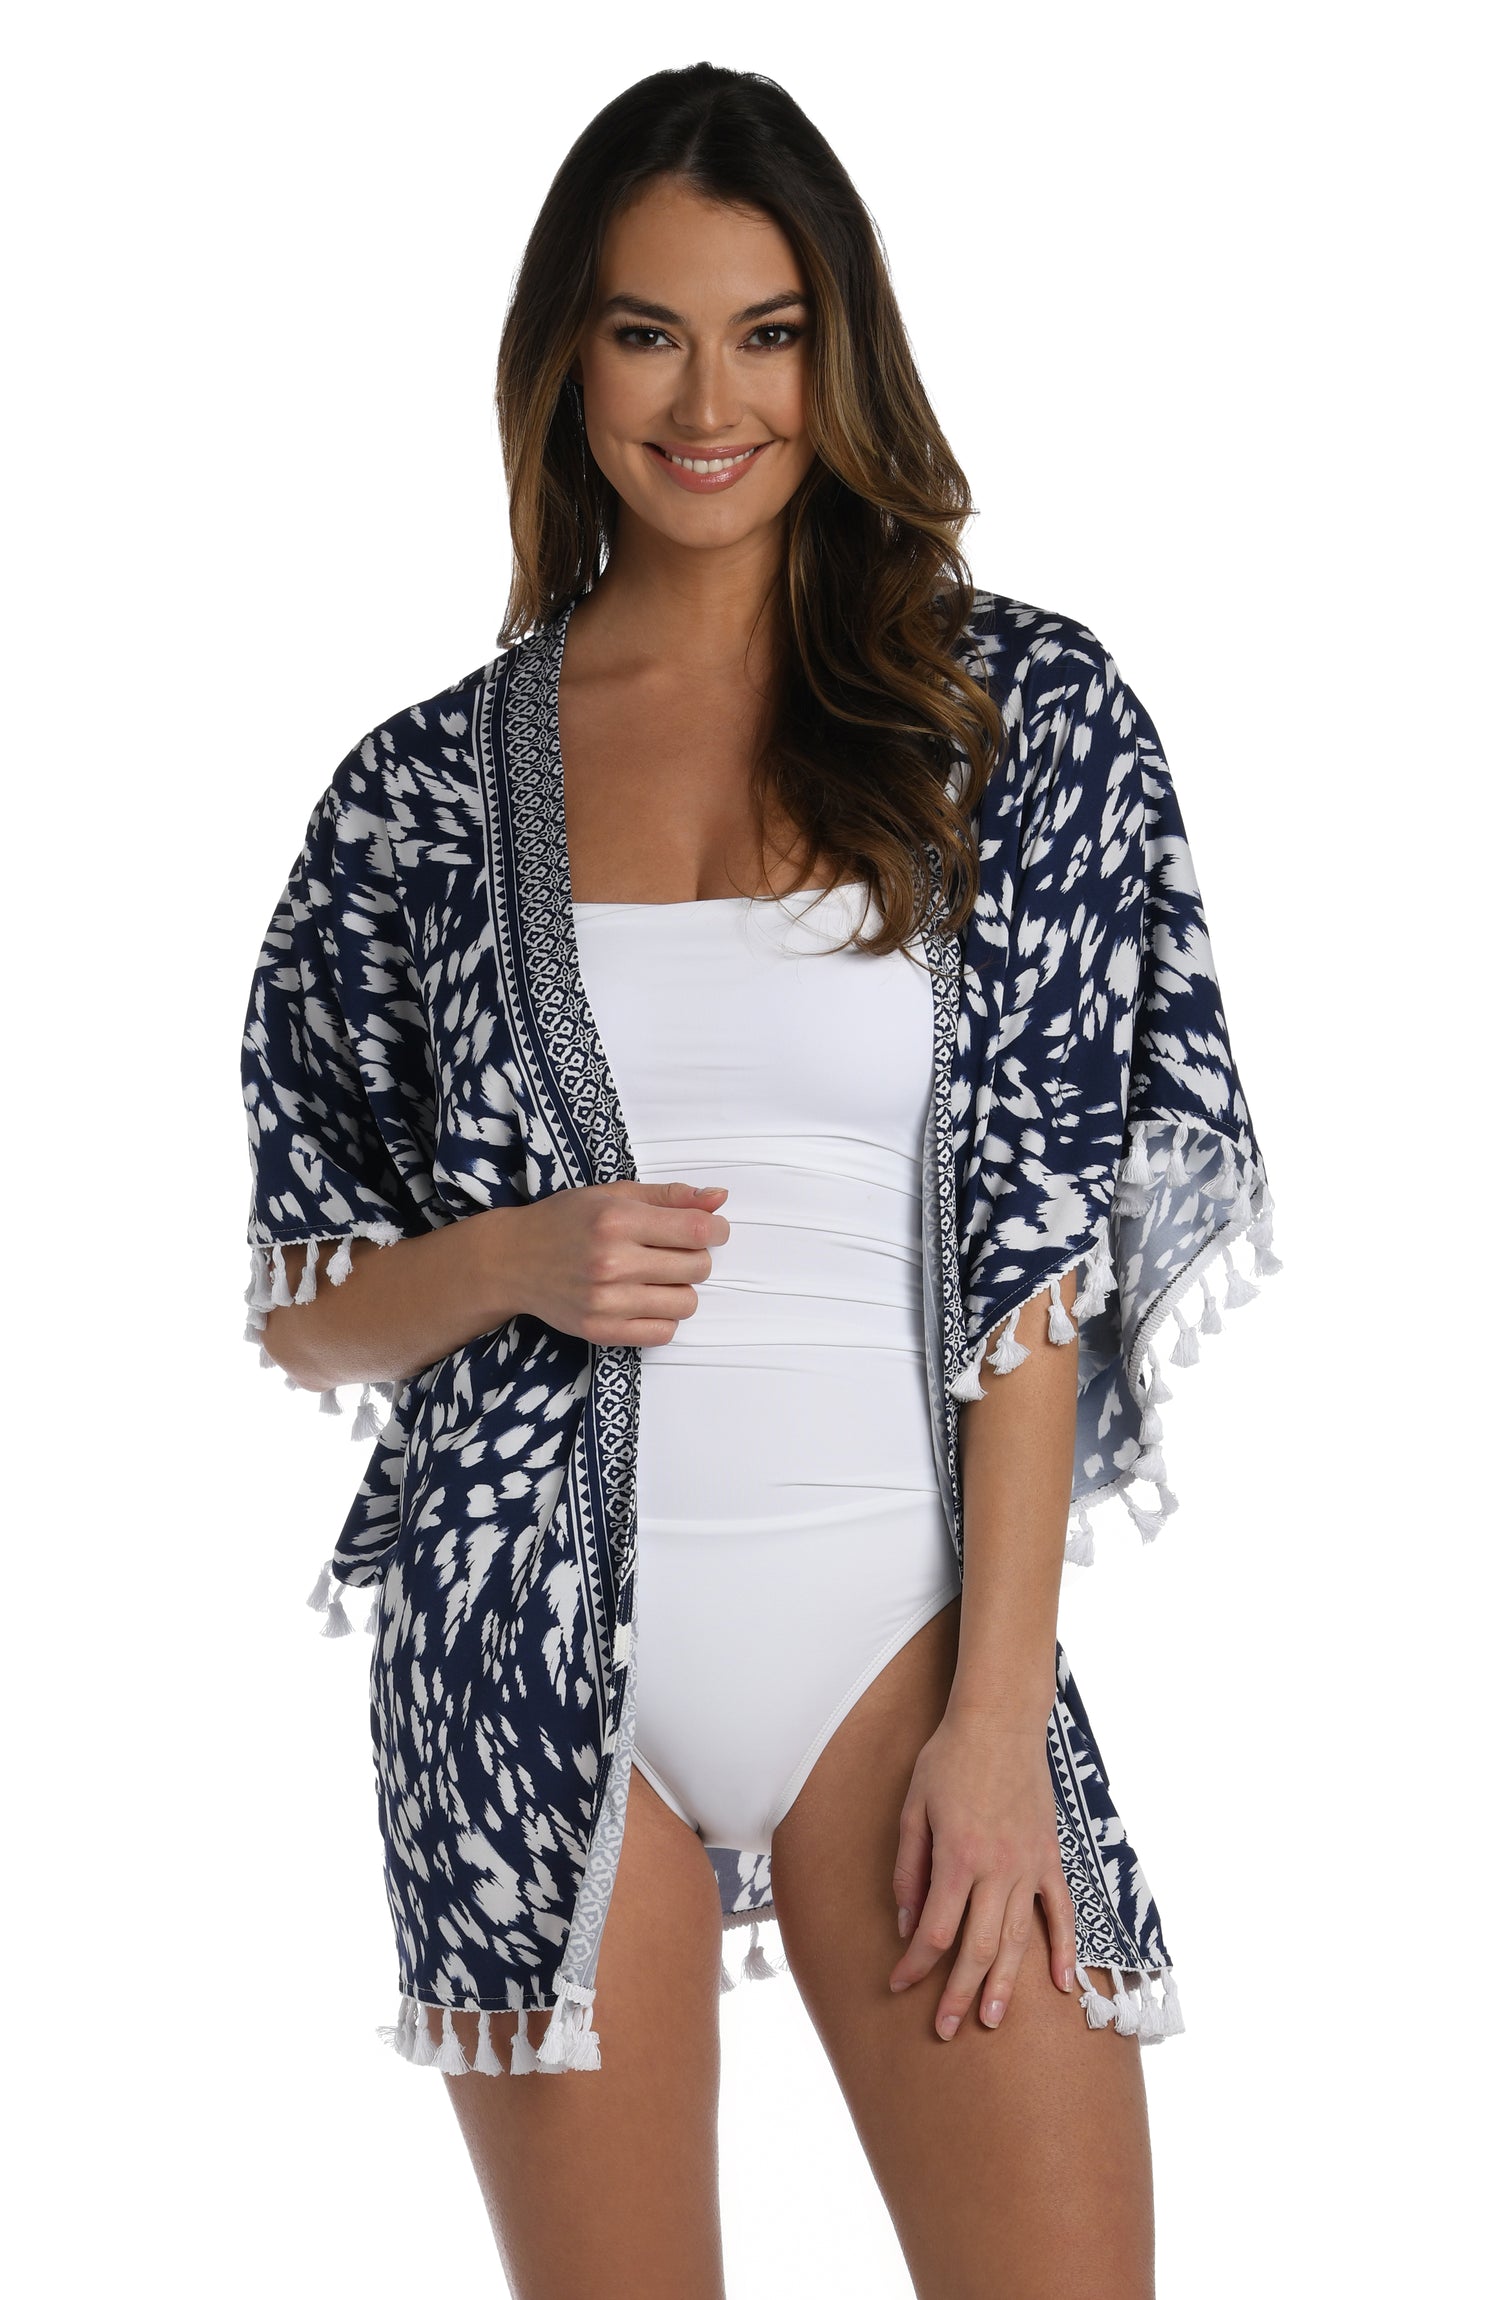 Model is wearing a indigo blue colored print with pops of white on this kimono cover up from our Changing Tides collection!